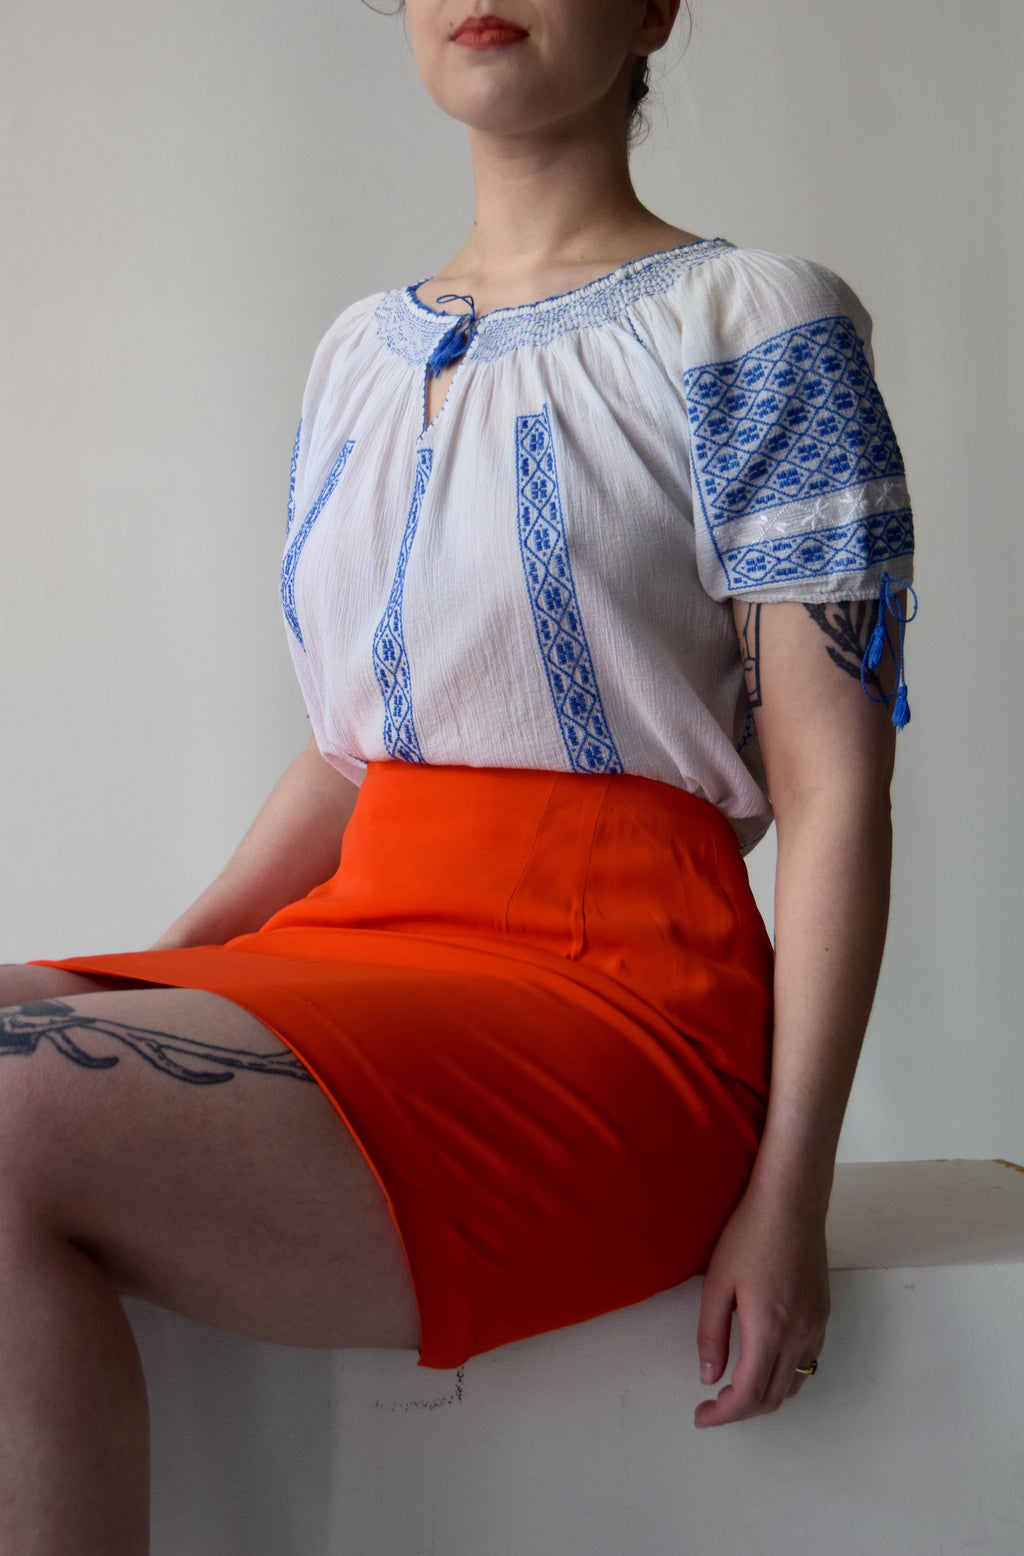 Vintage White Peasant Blouse with White and Blue Embroidery